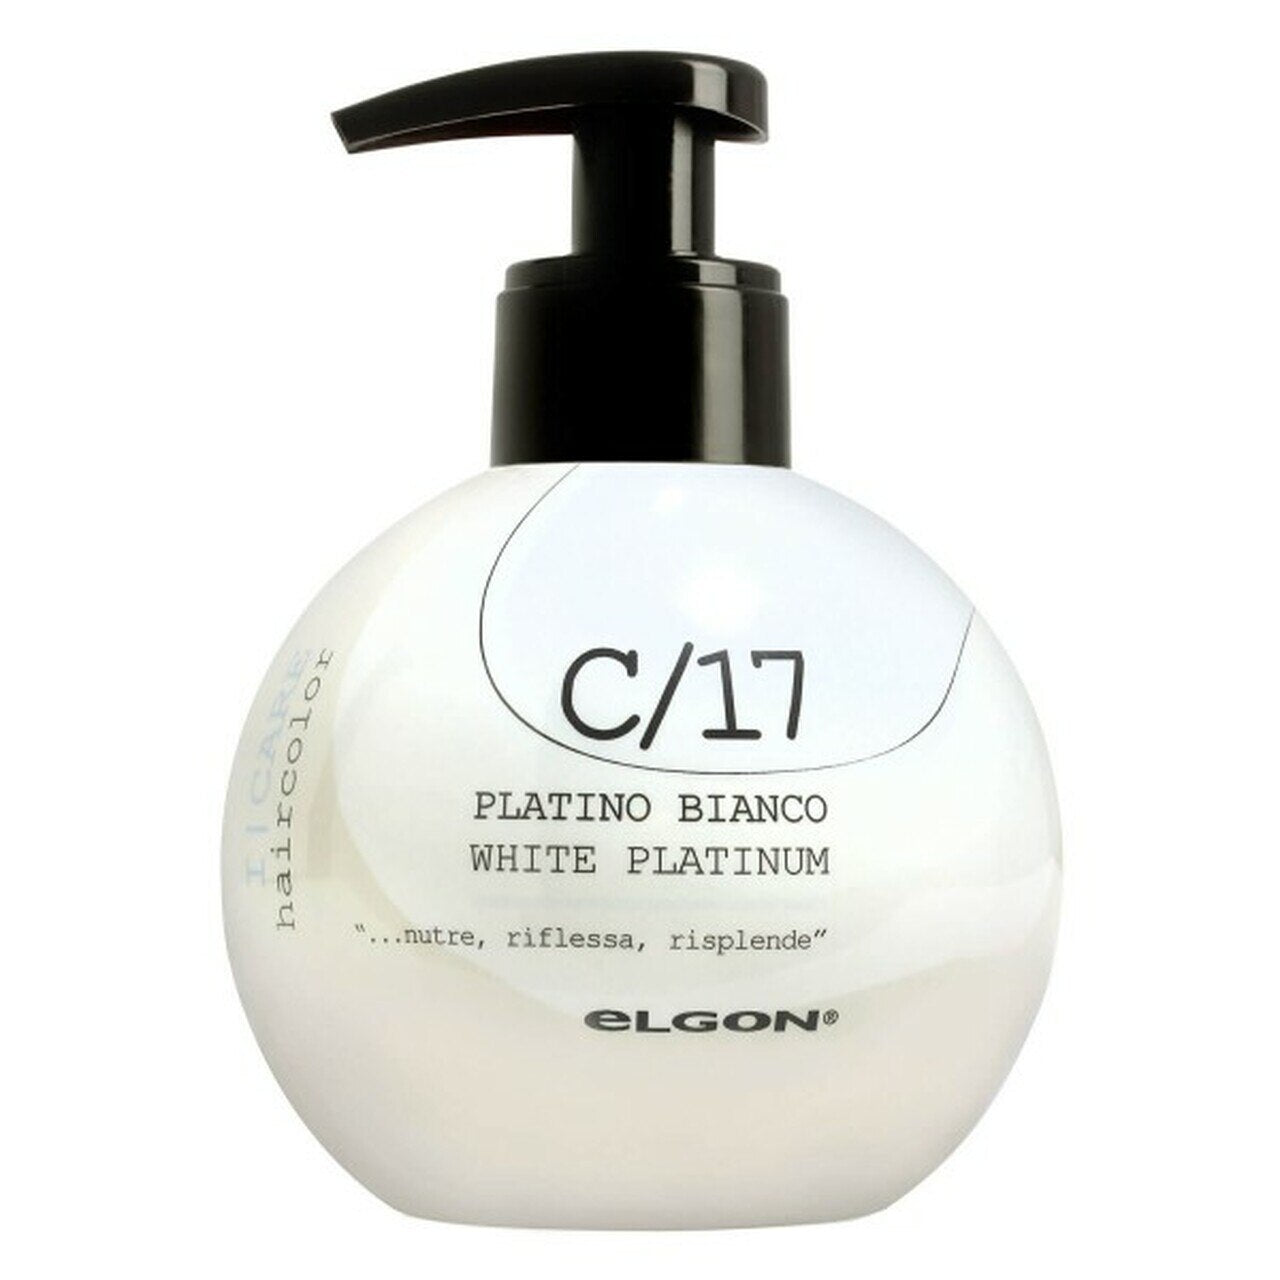 ELGON i-care C-17 Platino Bianco White Platinum - Ultimate Hair and Beauty